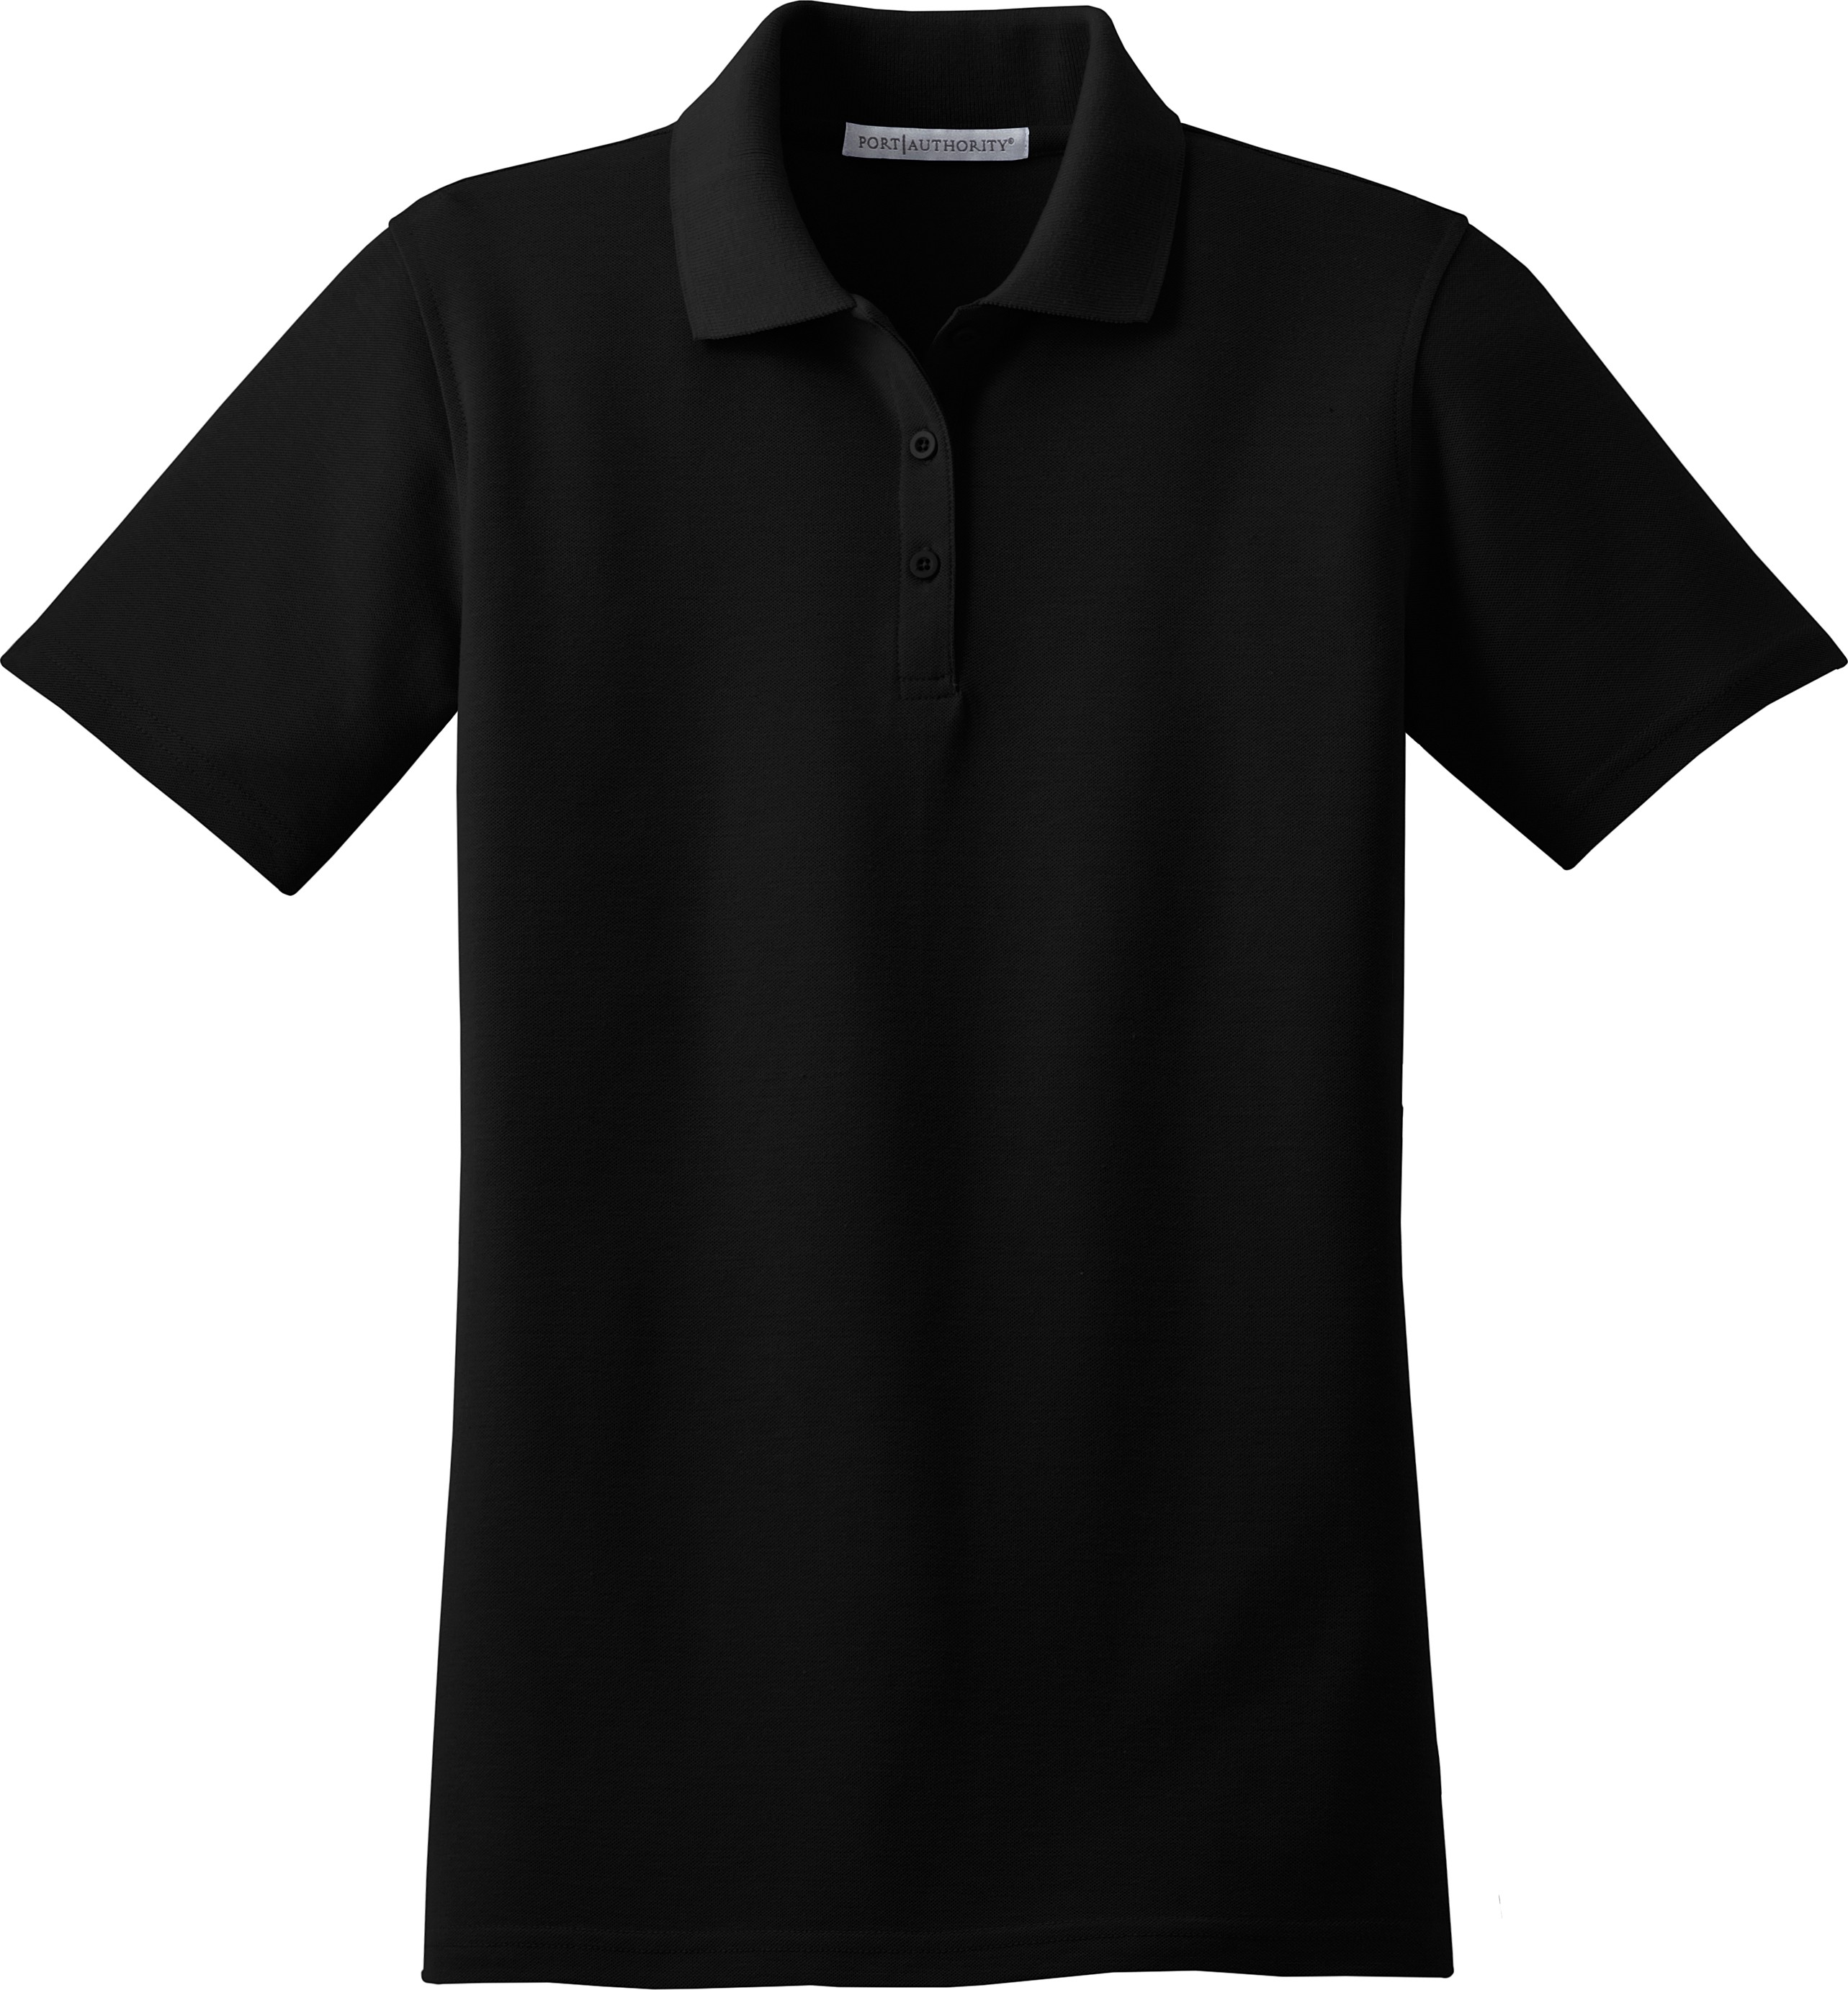 Collared Shirt Template Cliparts.co